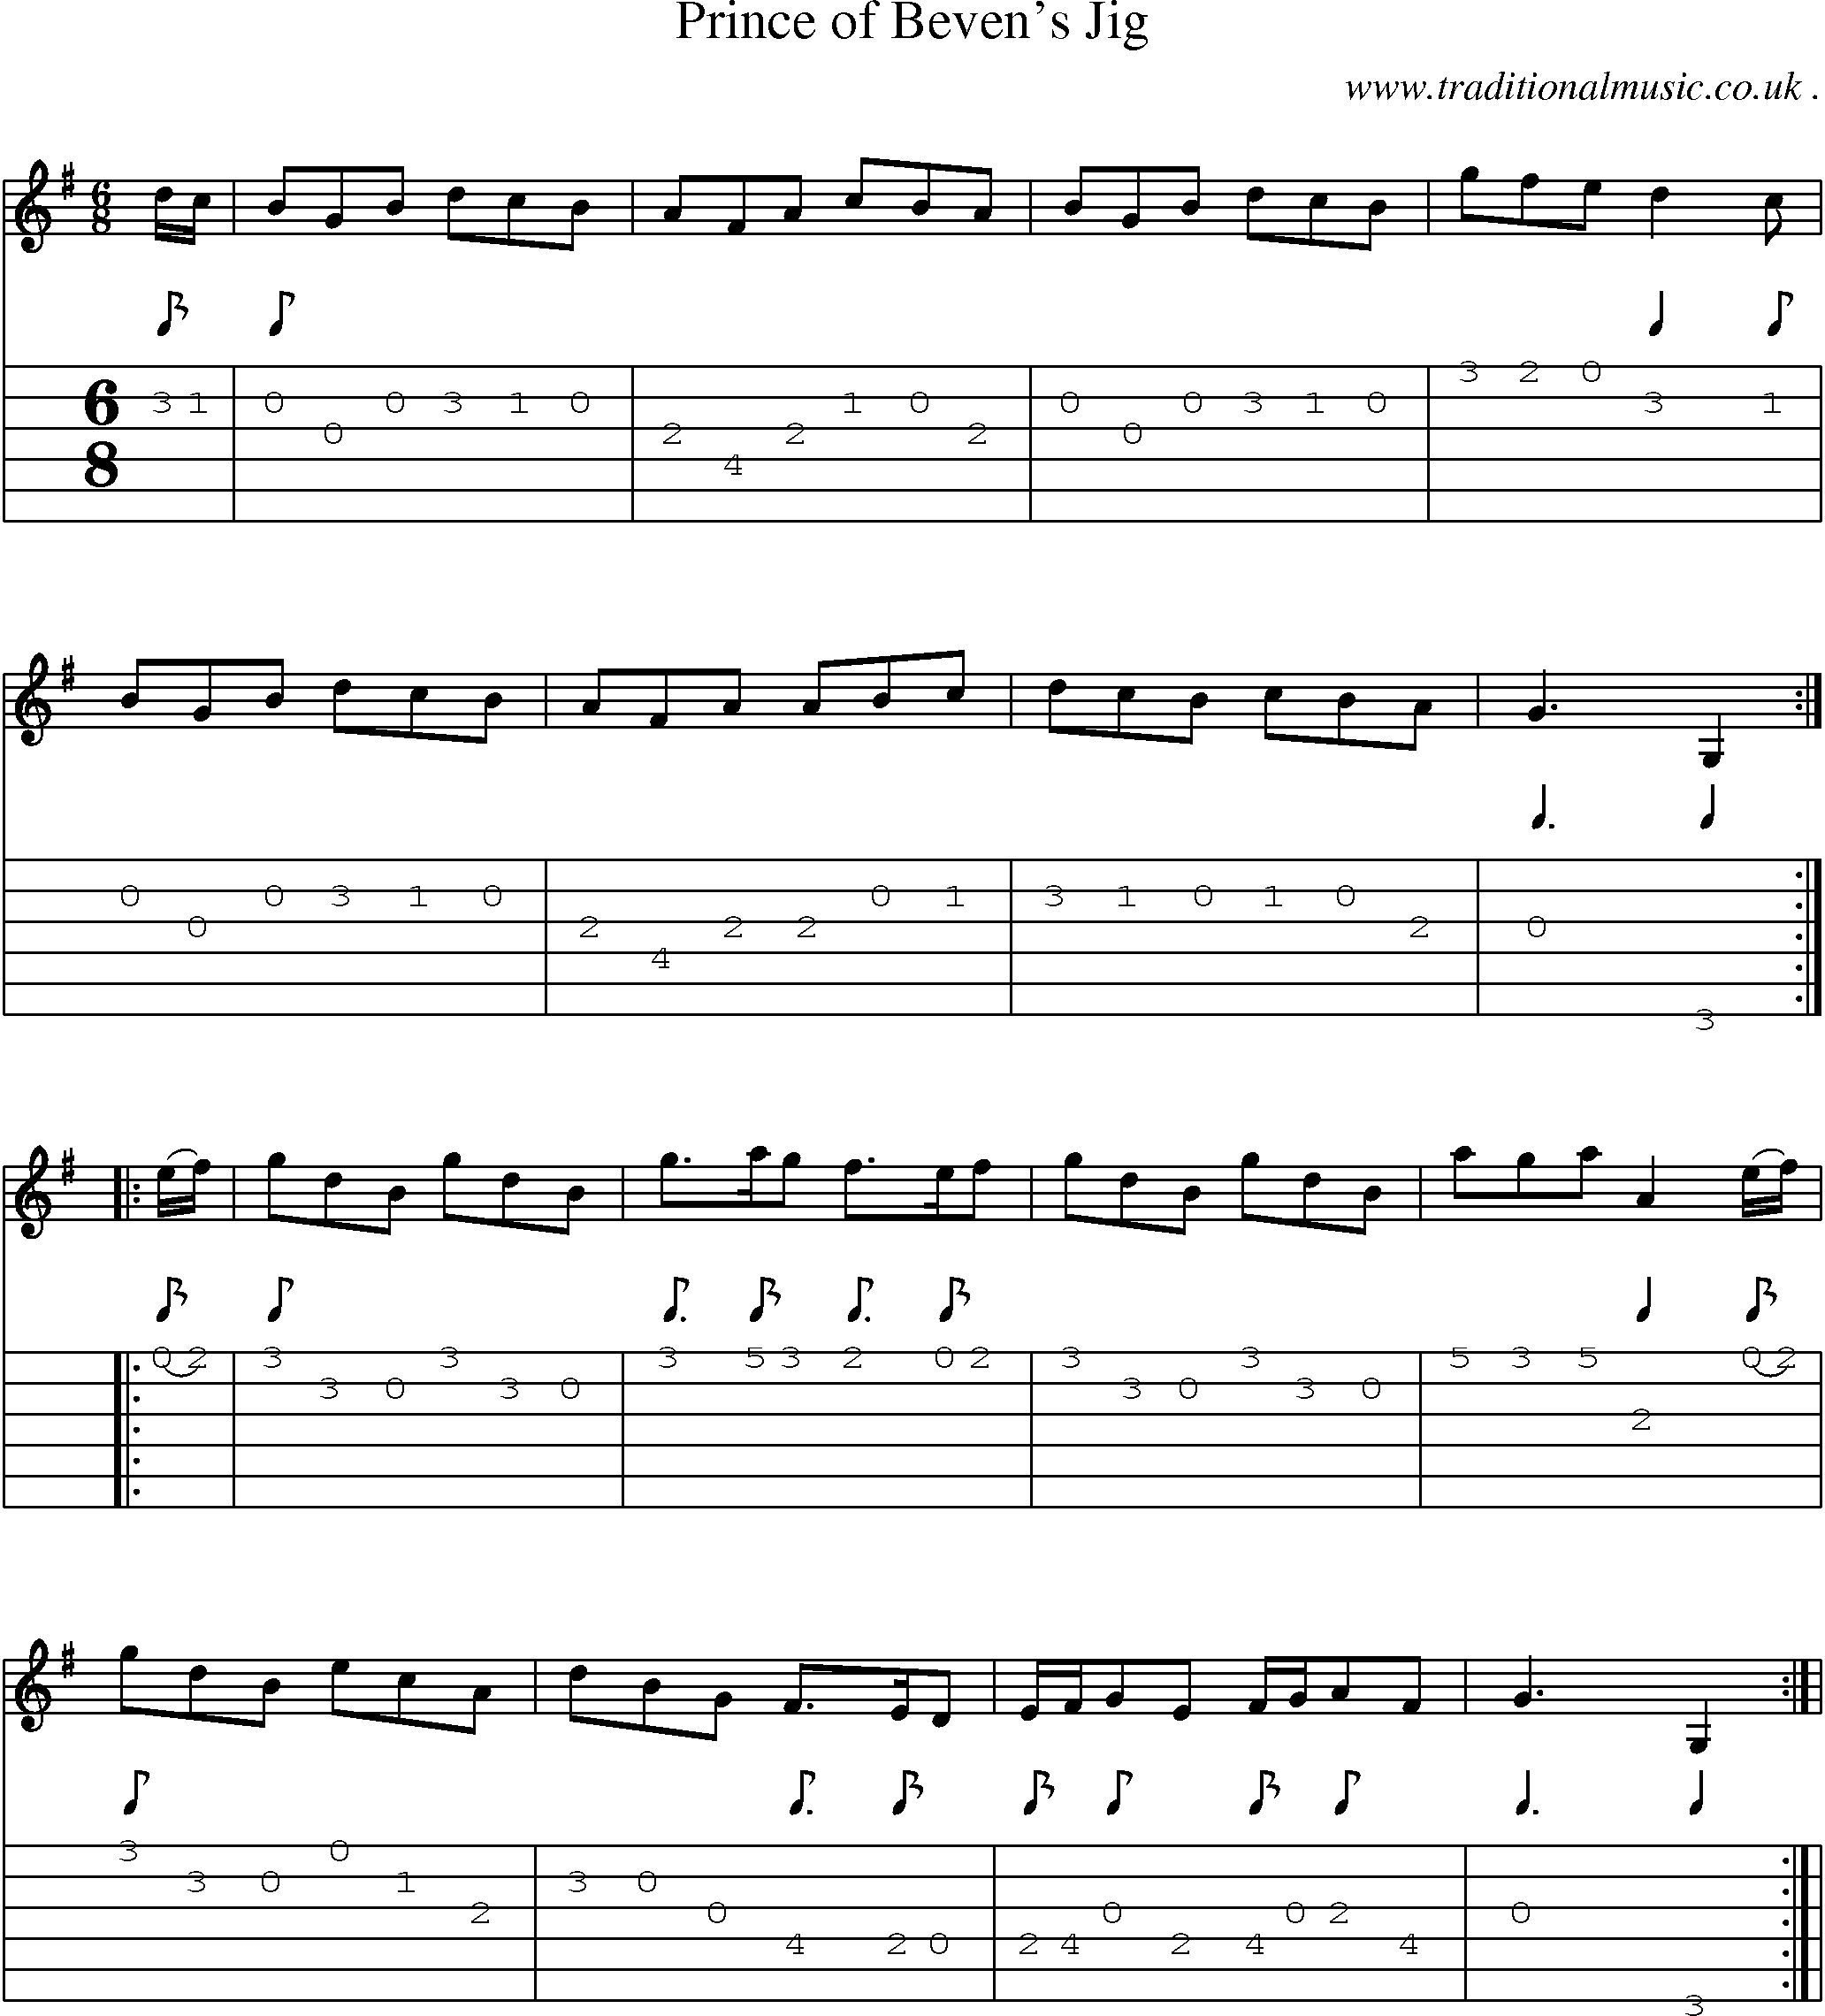 Sheet-Music and Guitar Tabs for Prince Of Bevens Jig